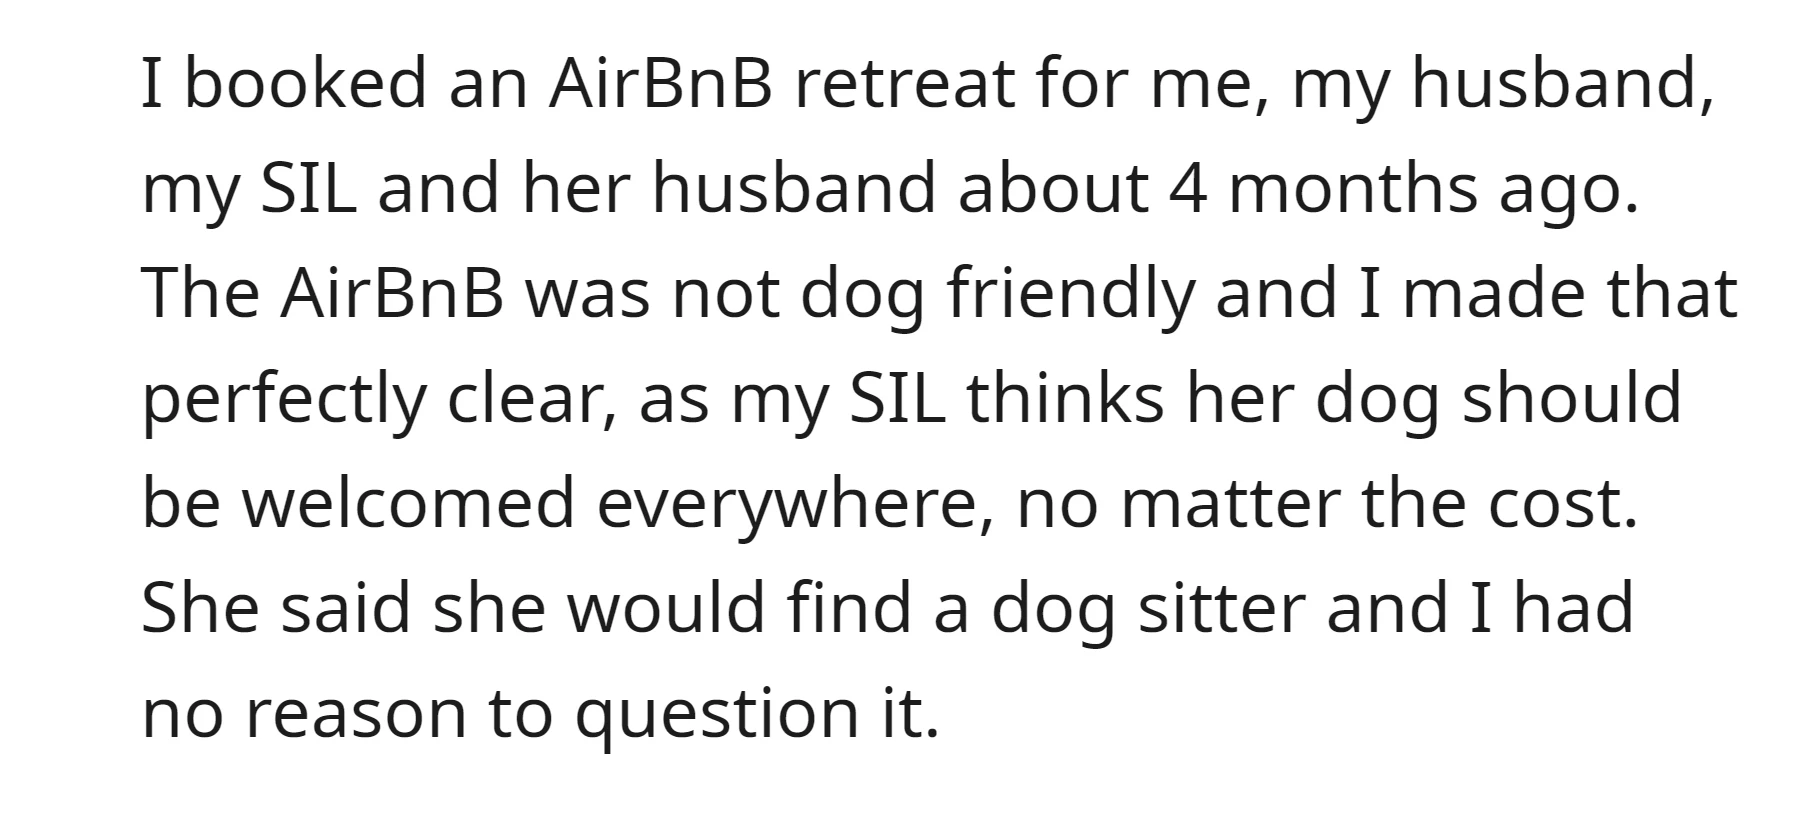 OP booked an AirBnB retreat for her, her husband, her SIL, and her husband